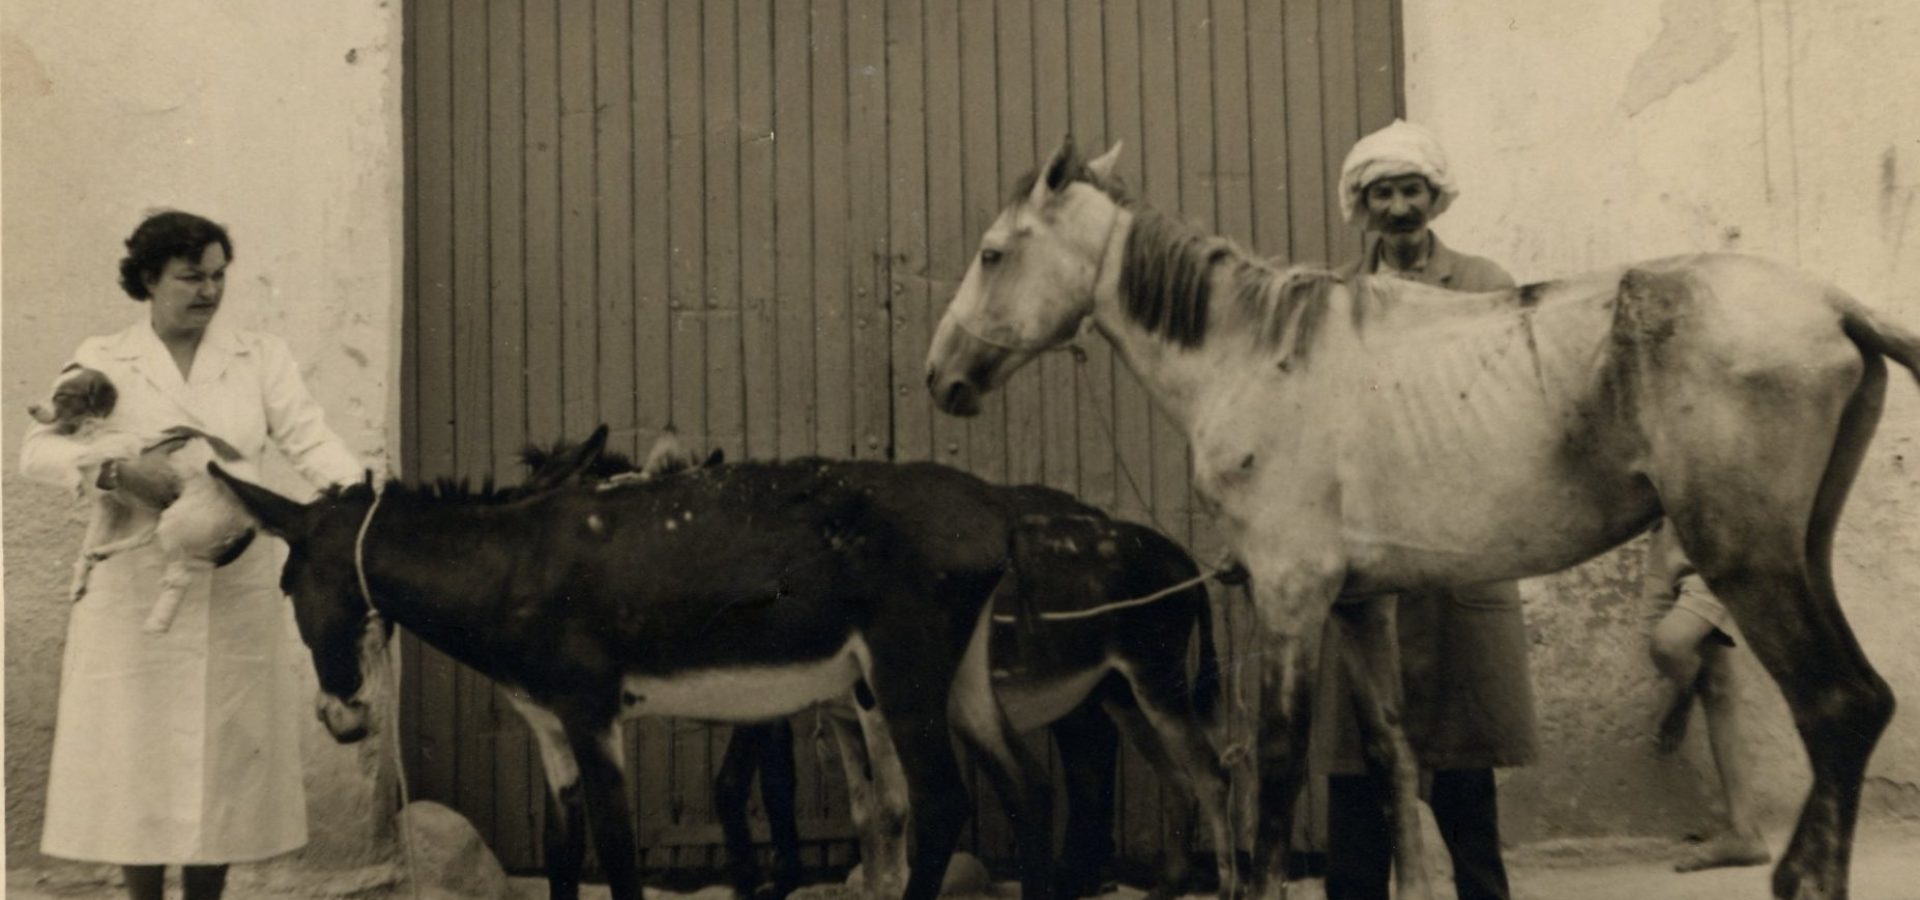 Woman vet with a dog in her hands, donkey, horse and a man wearing turban